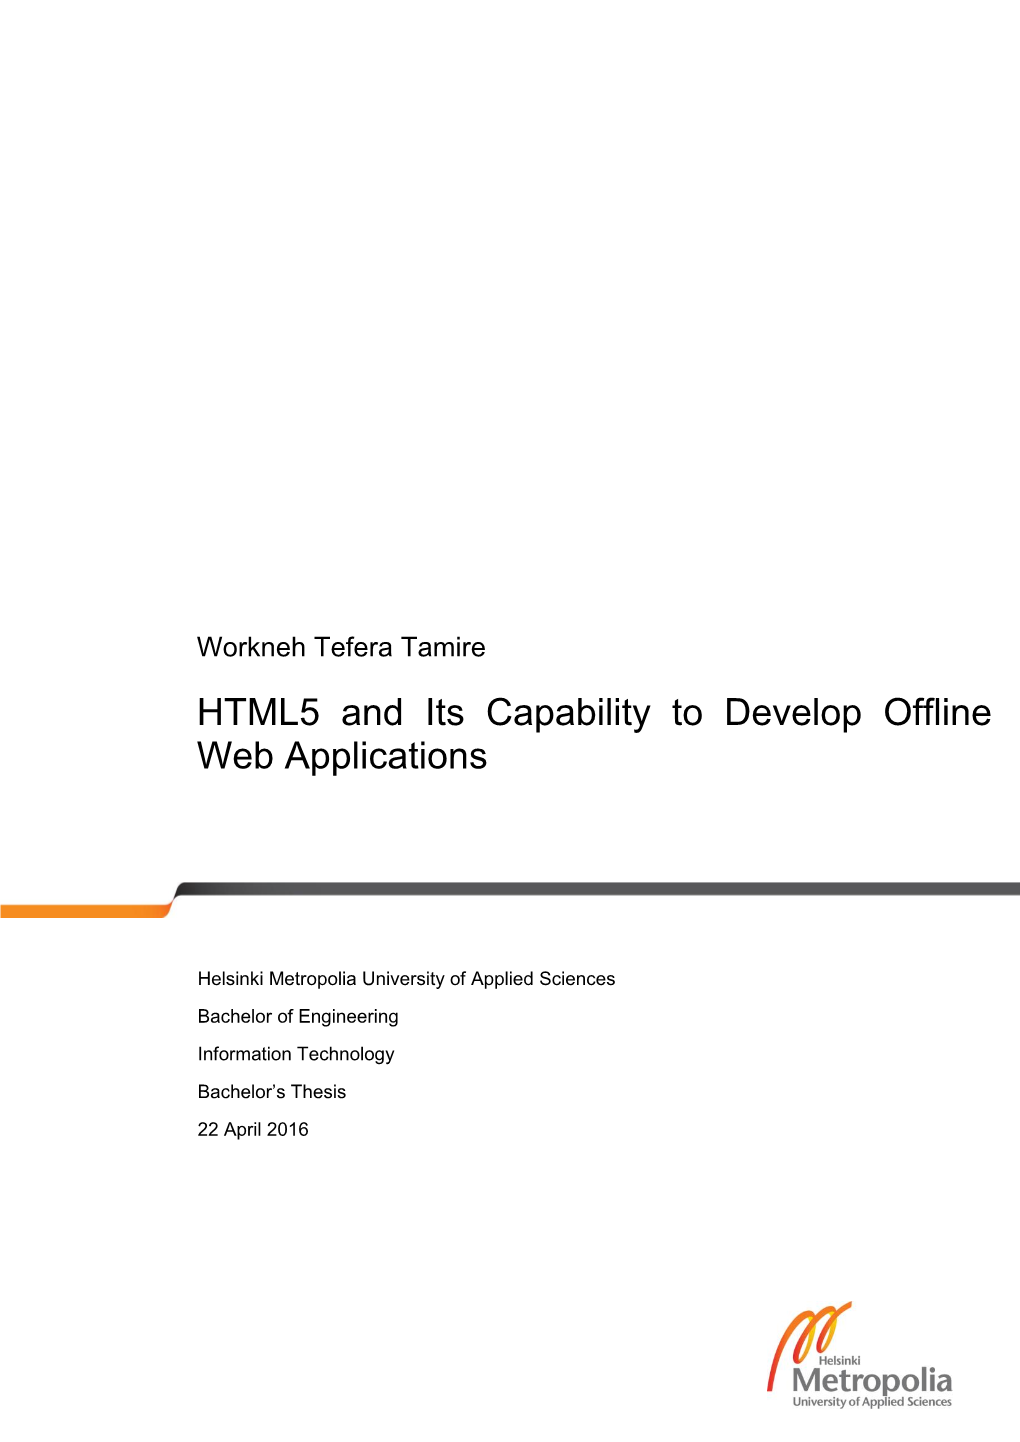 HTML5 and Its Capability to Develop Offline Web Applications